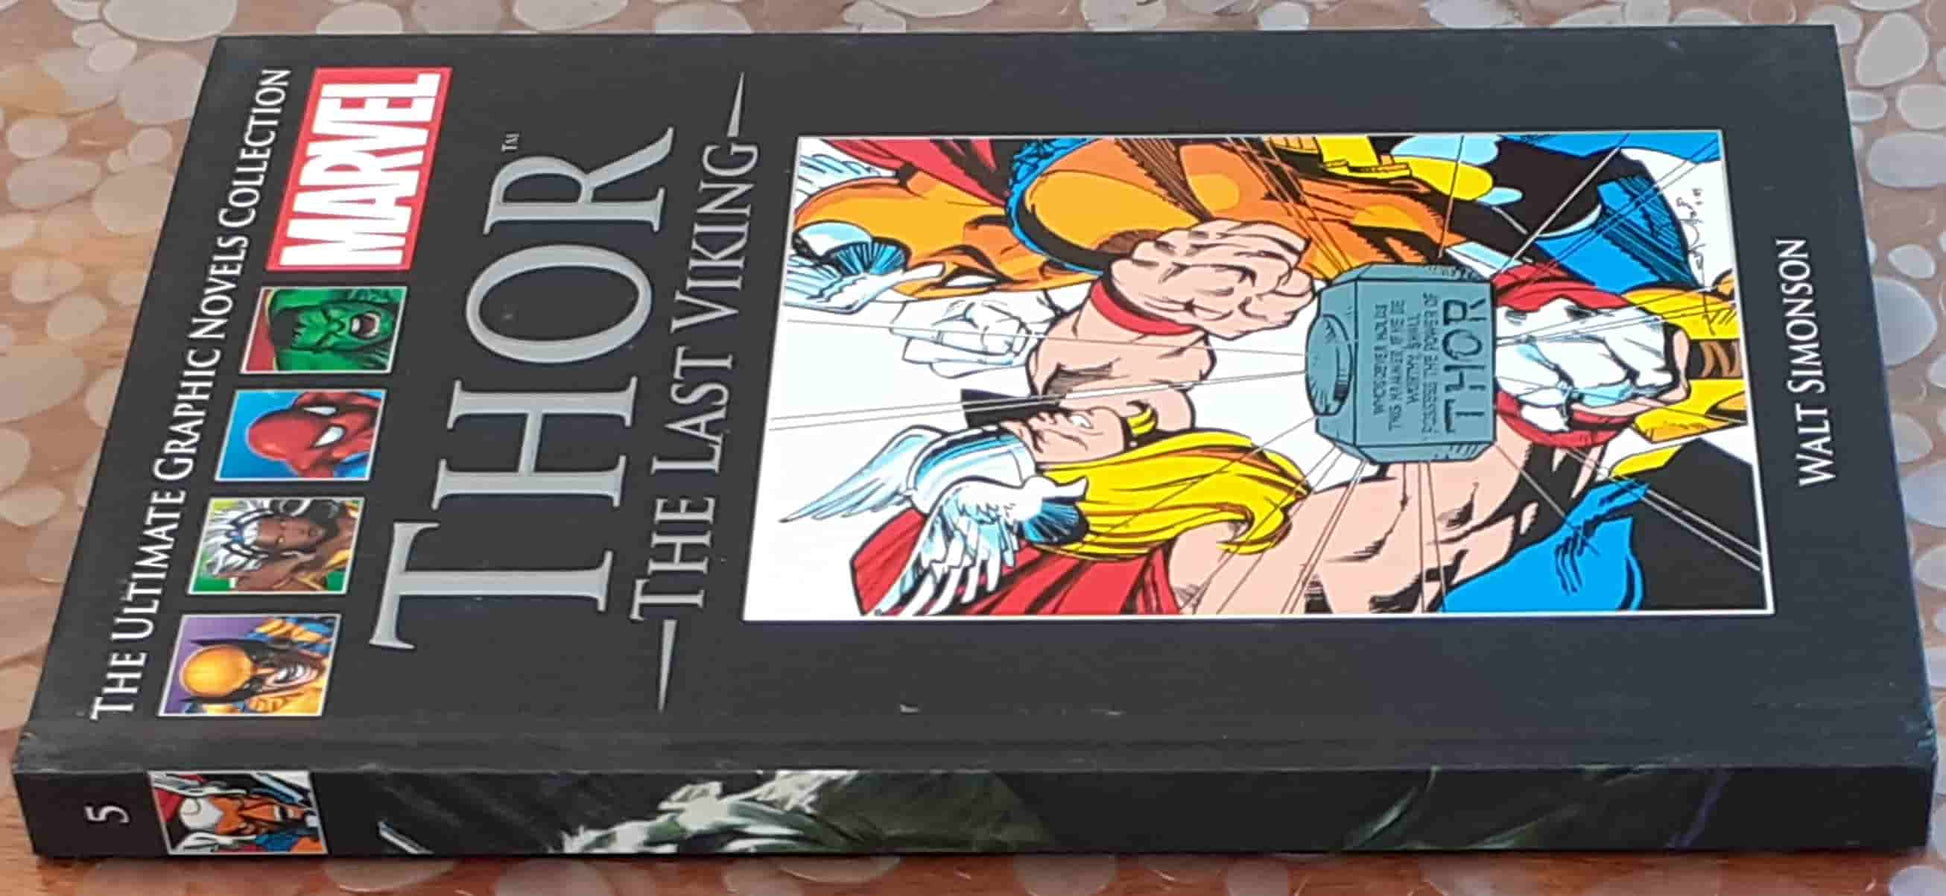 mighty thor, thor - Best Books